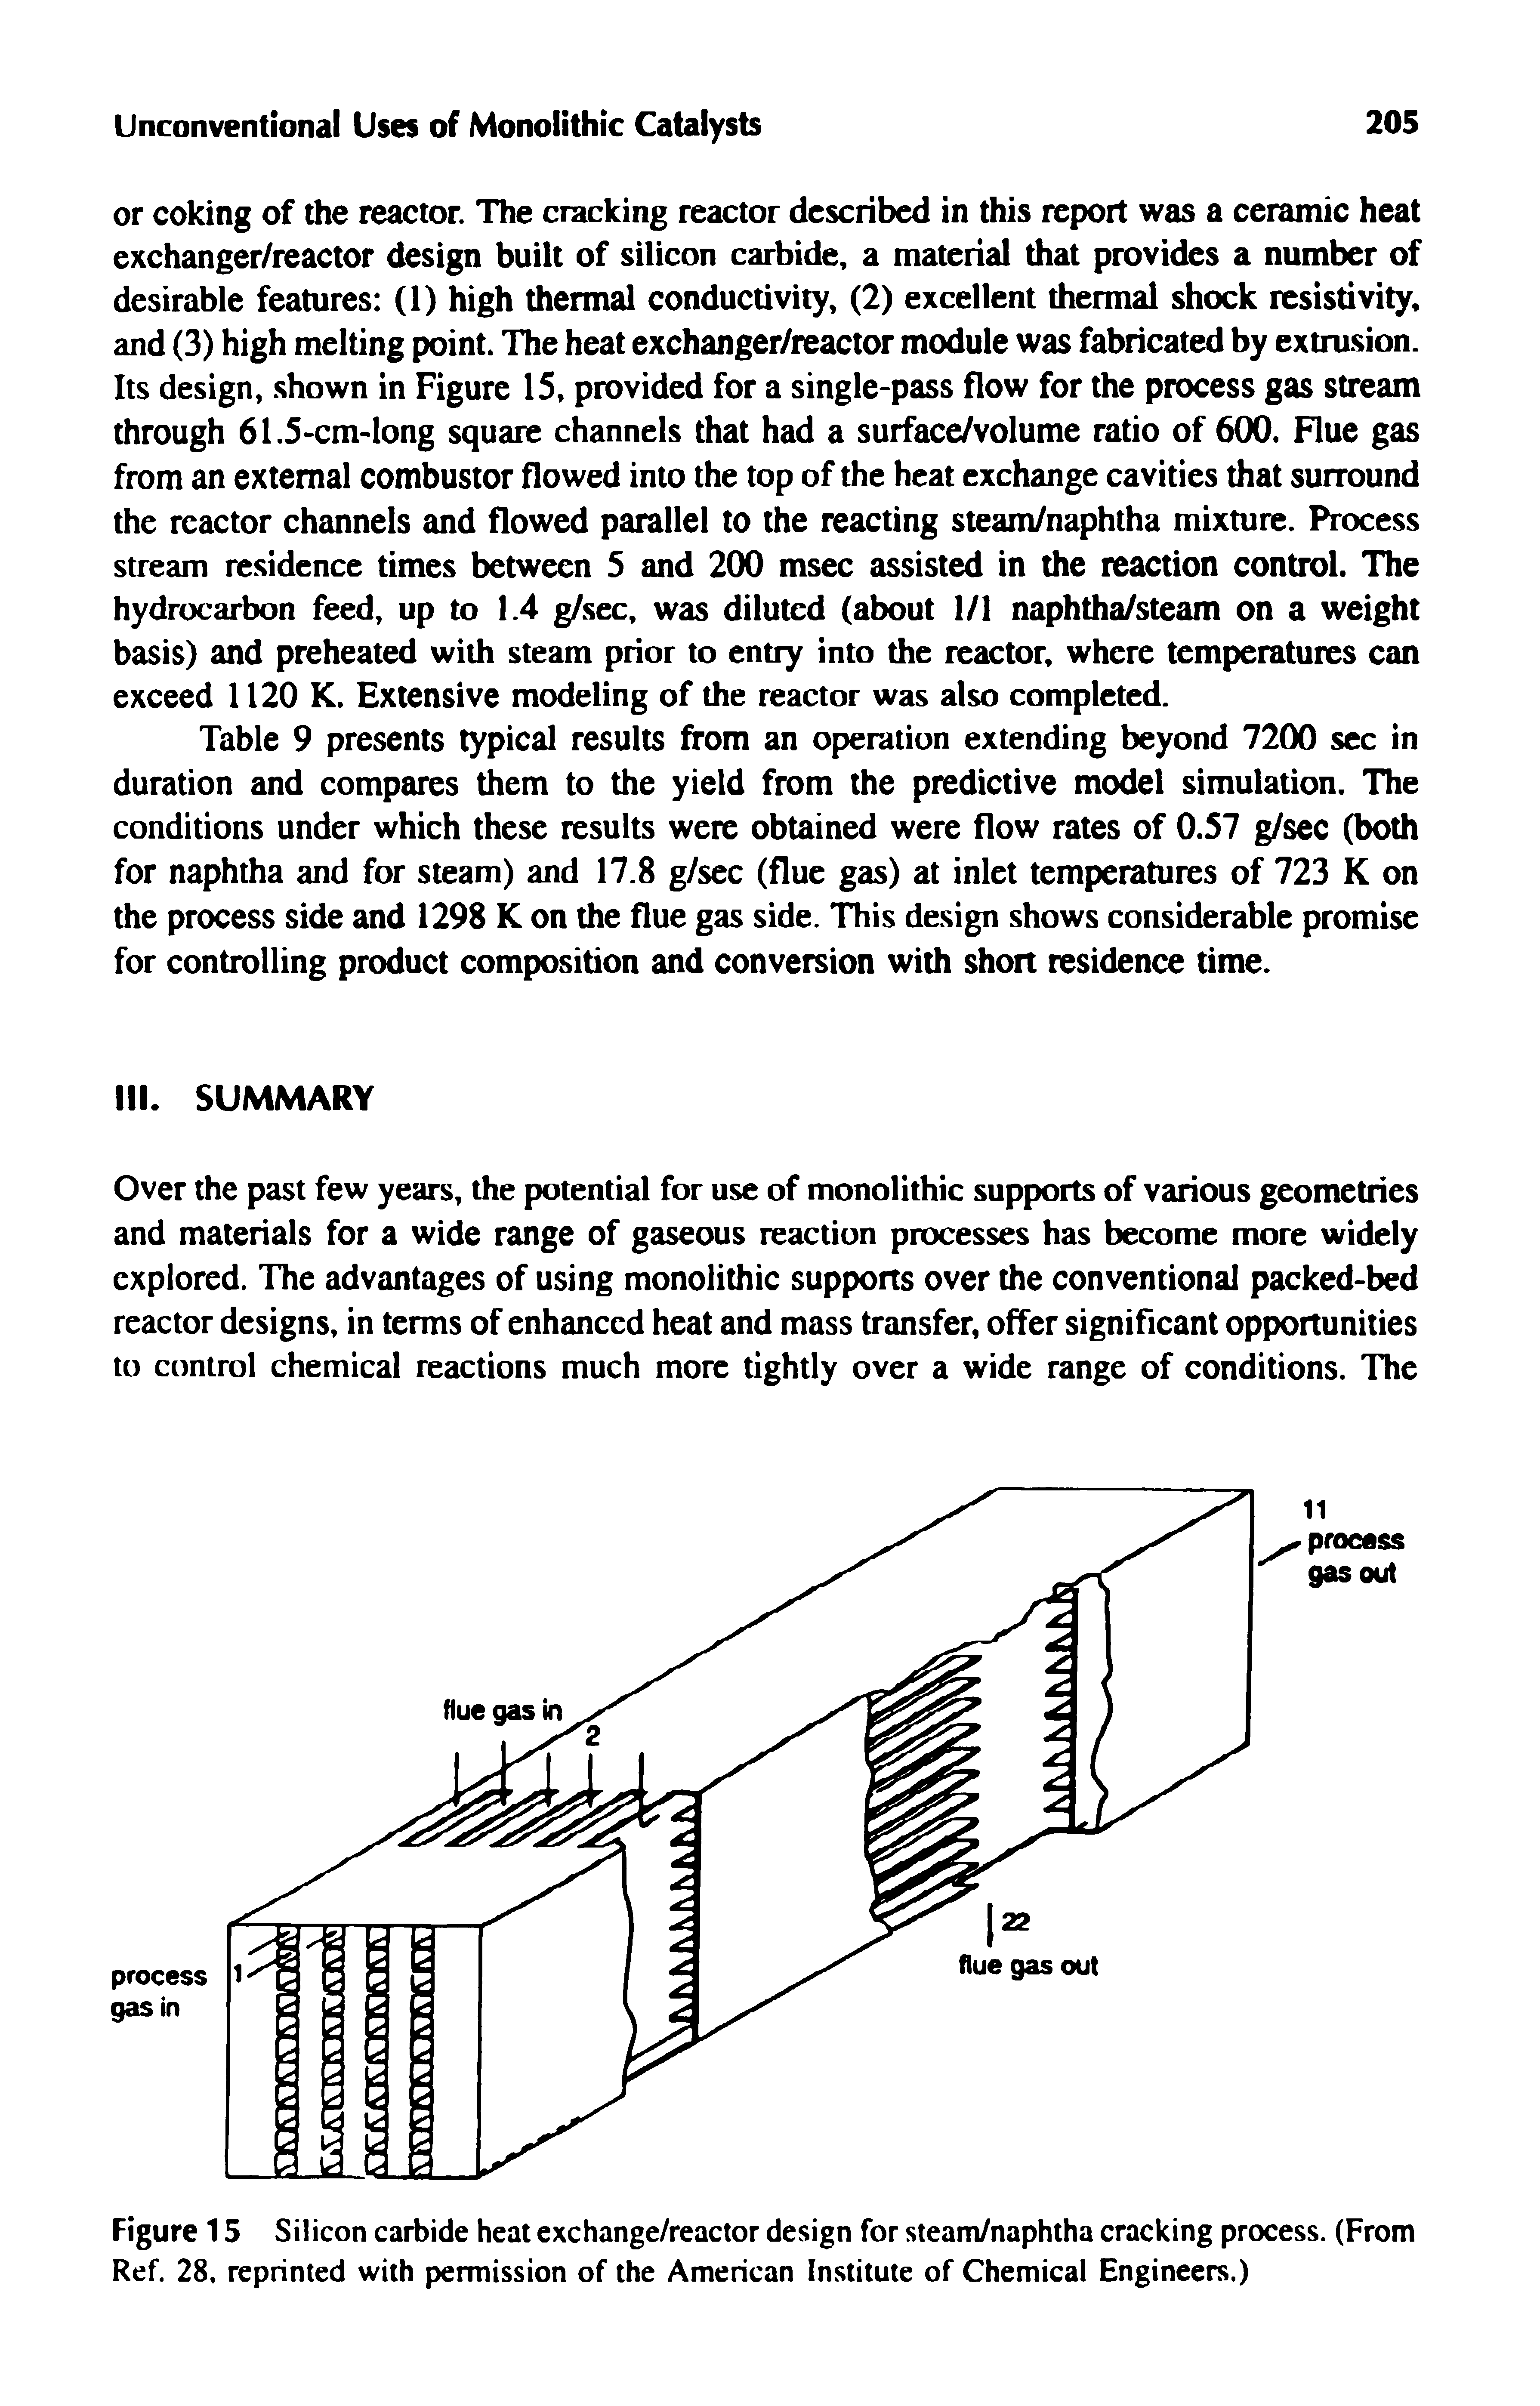 Figure 15 Silicon carbide heat exchange/reactor design for steam/naphtha cracking process. (From Ref. 28, reprinted with permission of the American Institute of Chemical Engineers.)...